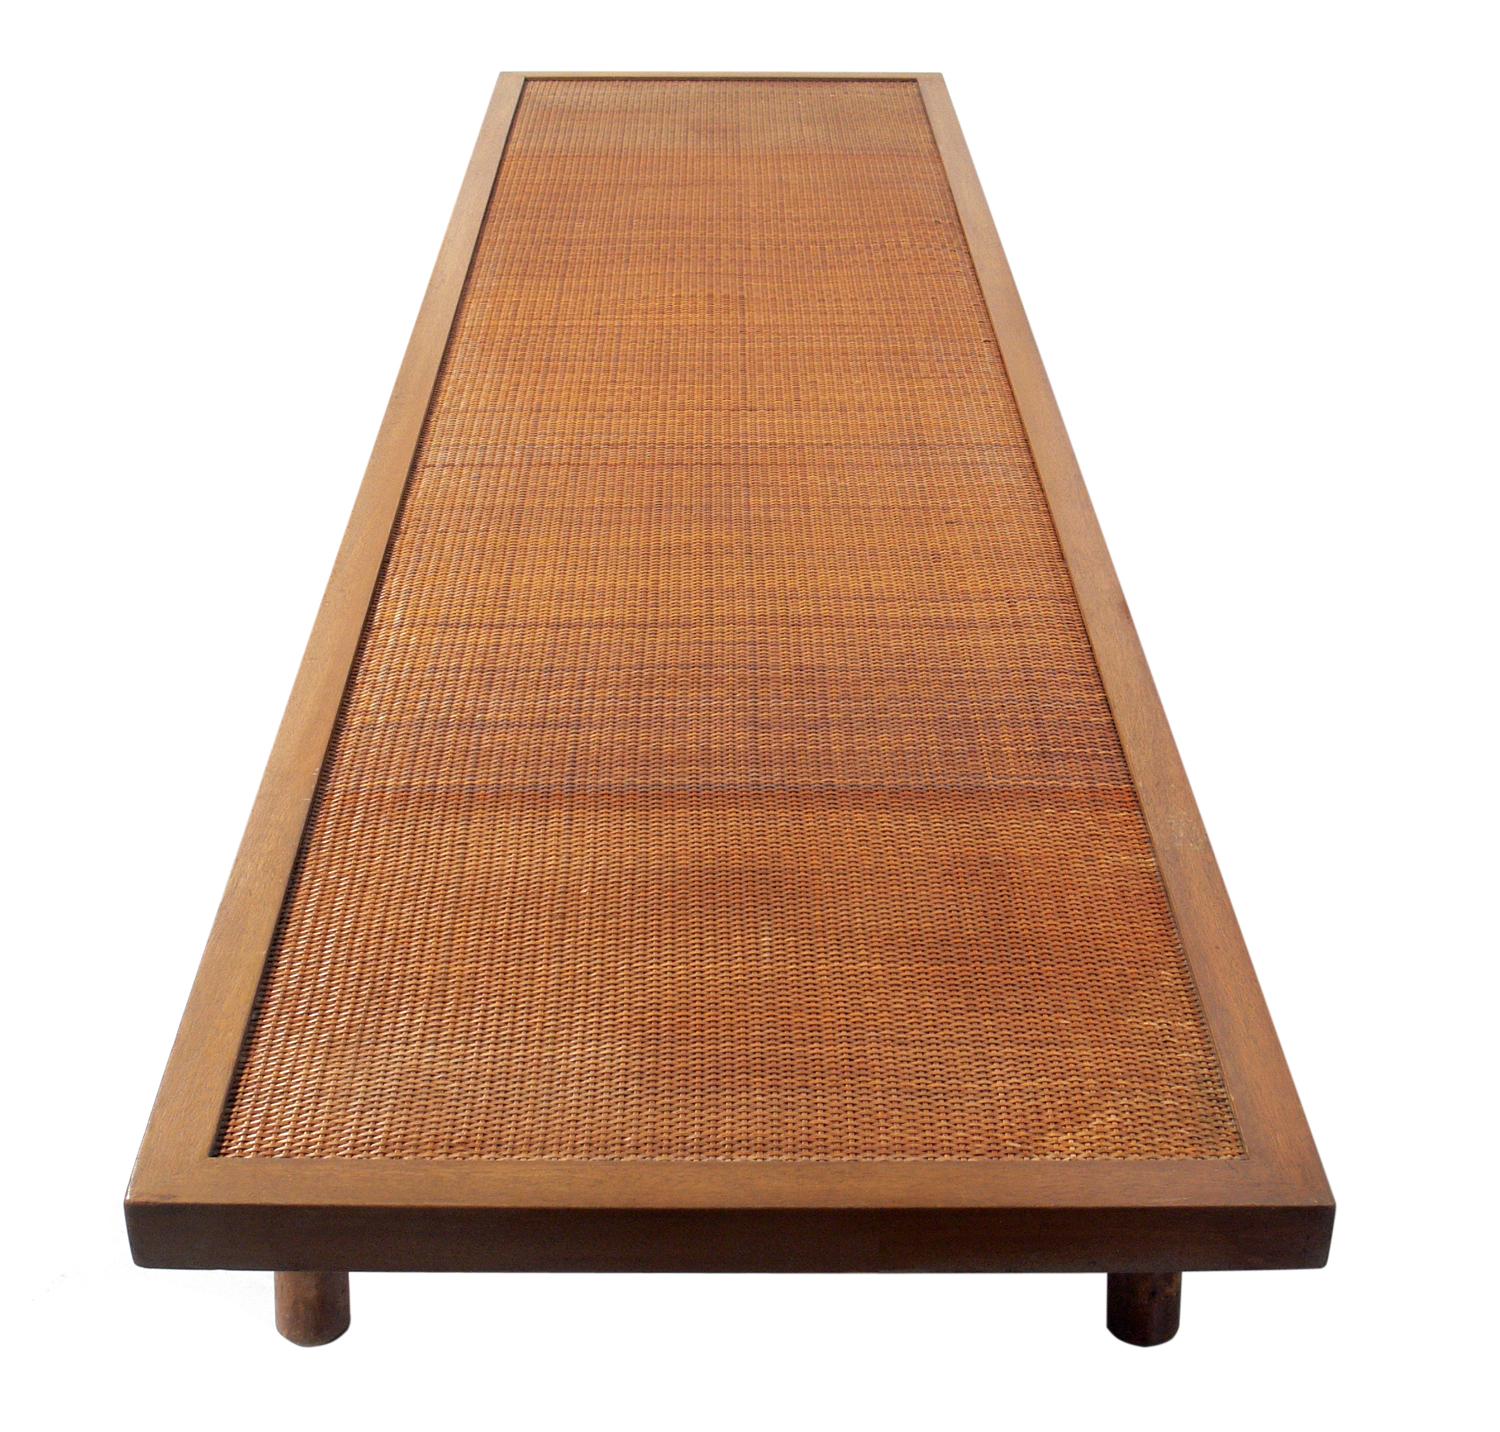 Mid-Century Modern Low Slung Coffee Table or Bench by T.H. Robsjohn-Gibbings